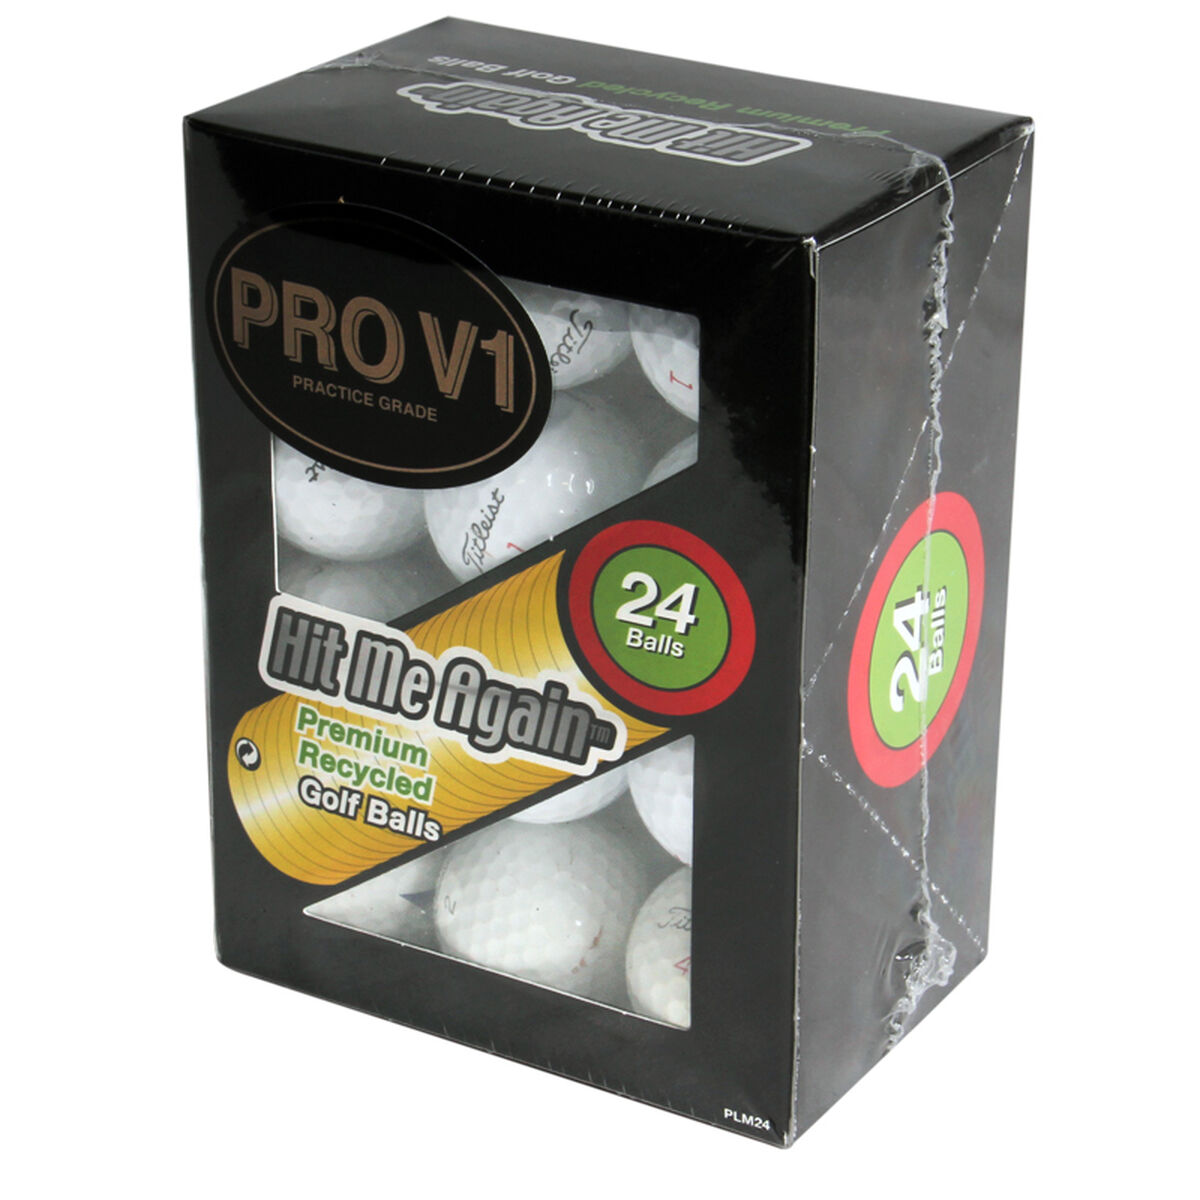 Challenge Golf White Dimple Challenge Titleist Pro V1 Pack of 24 Practice Golf Balls, Size: One Size | American Golf